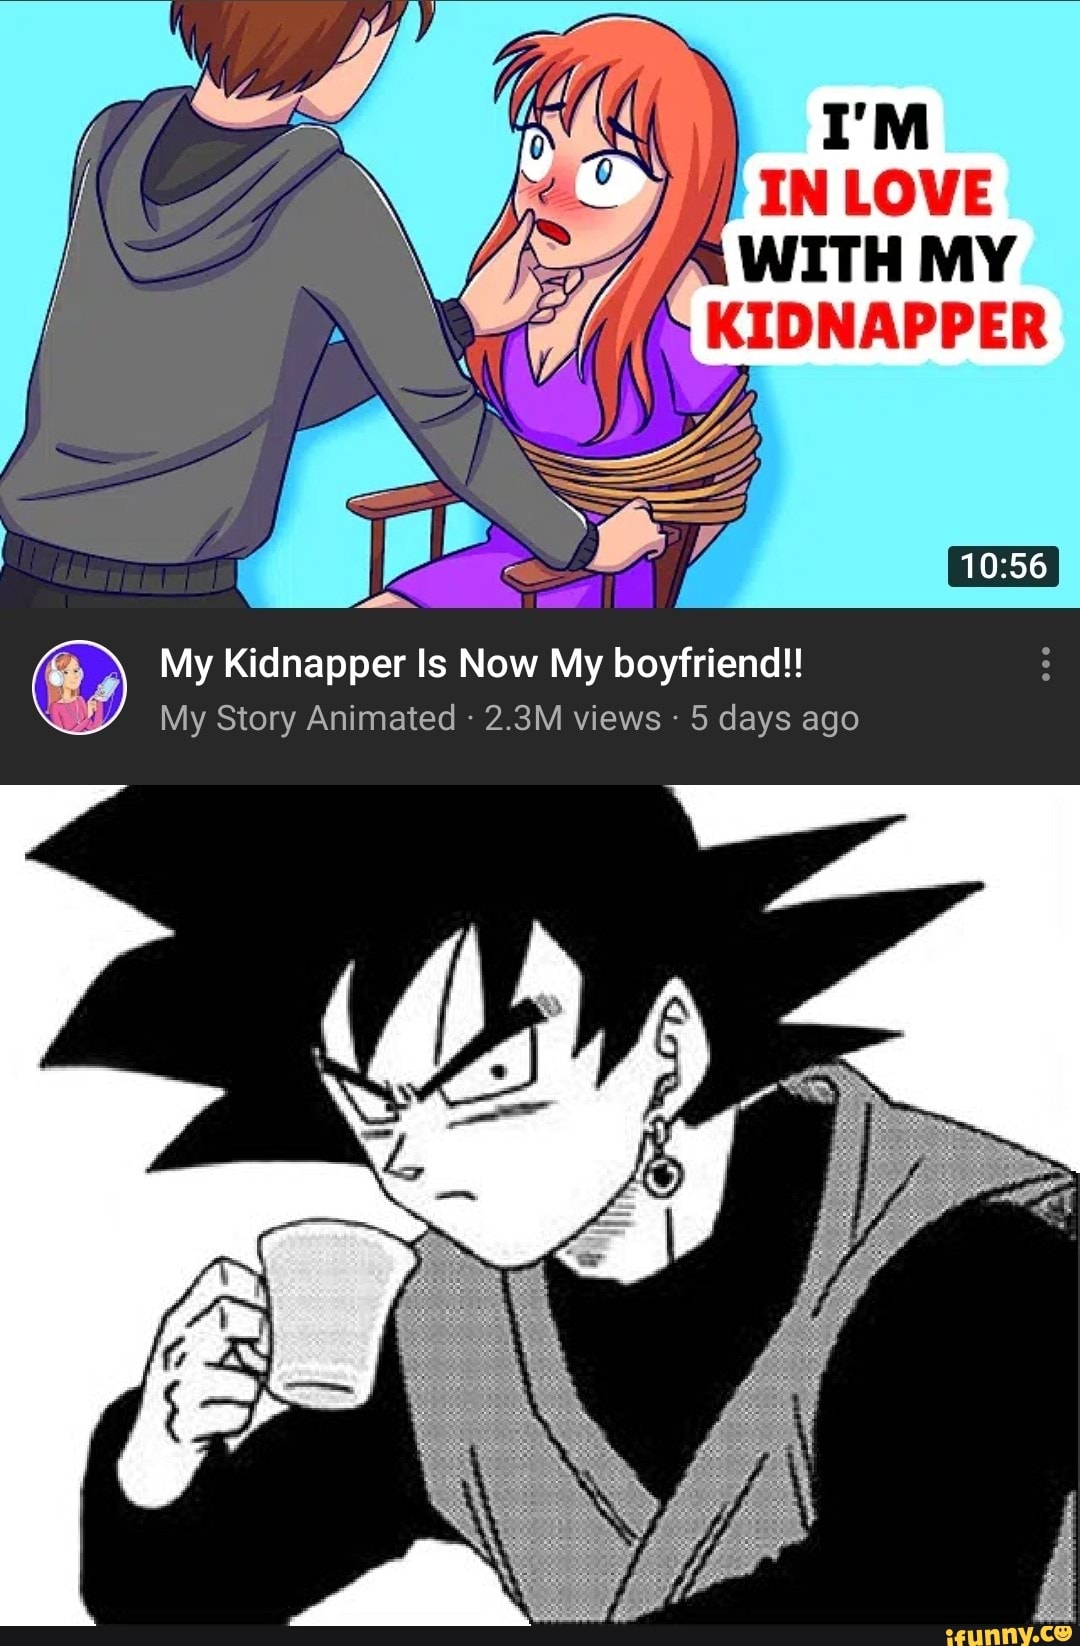 My Kidnapper Is Now My boyfriend!! My Story Animated  views 5 days ago  